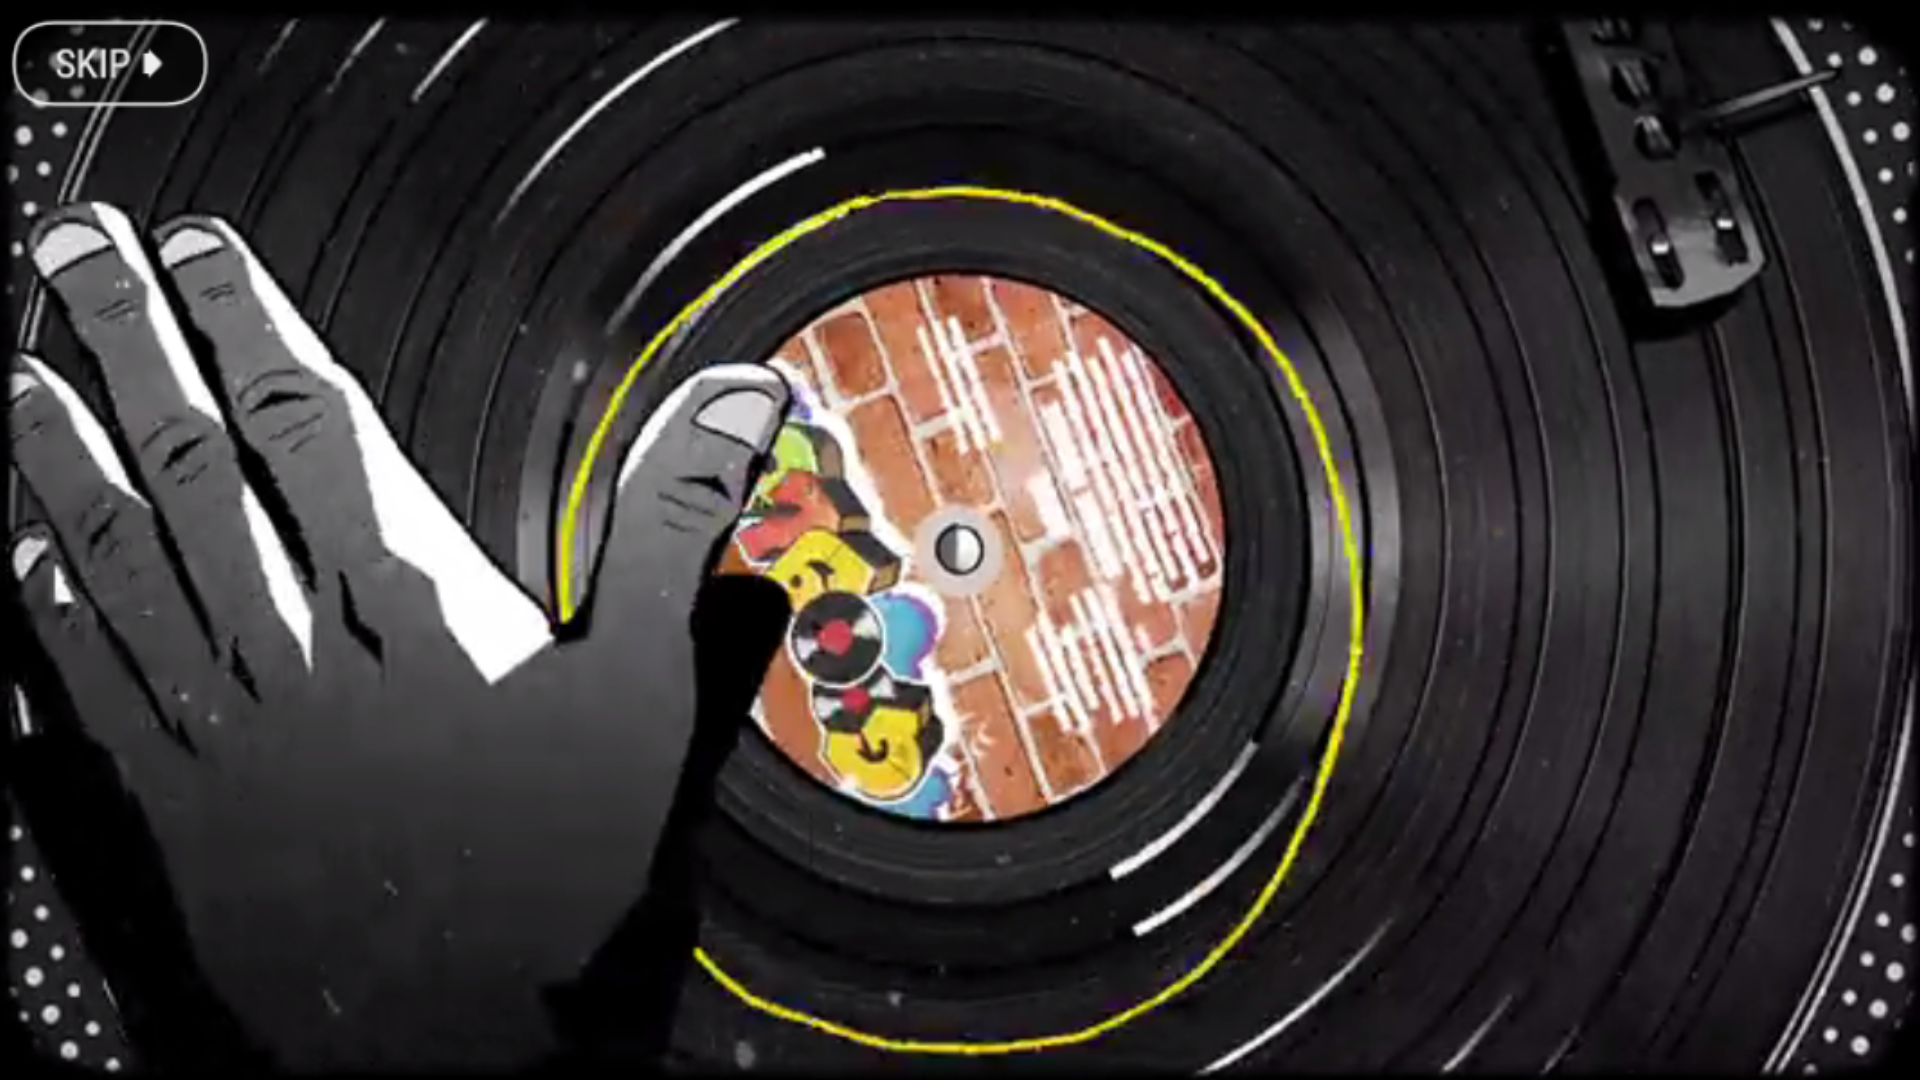 Google is bringing the funk with a doodle & digital turntable marking the birth of Hip Hop music